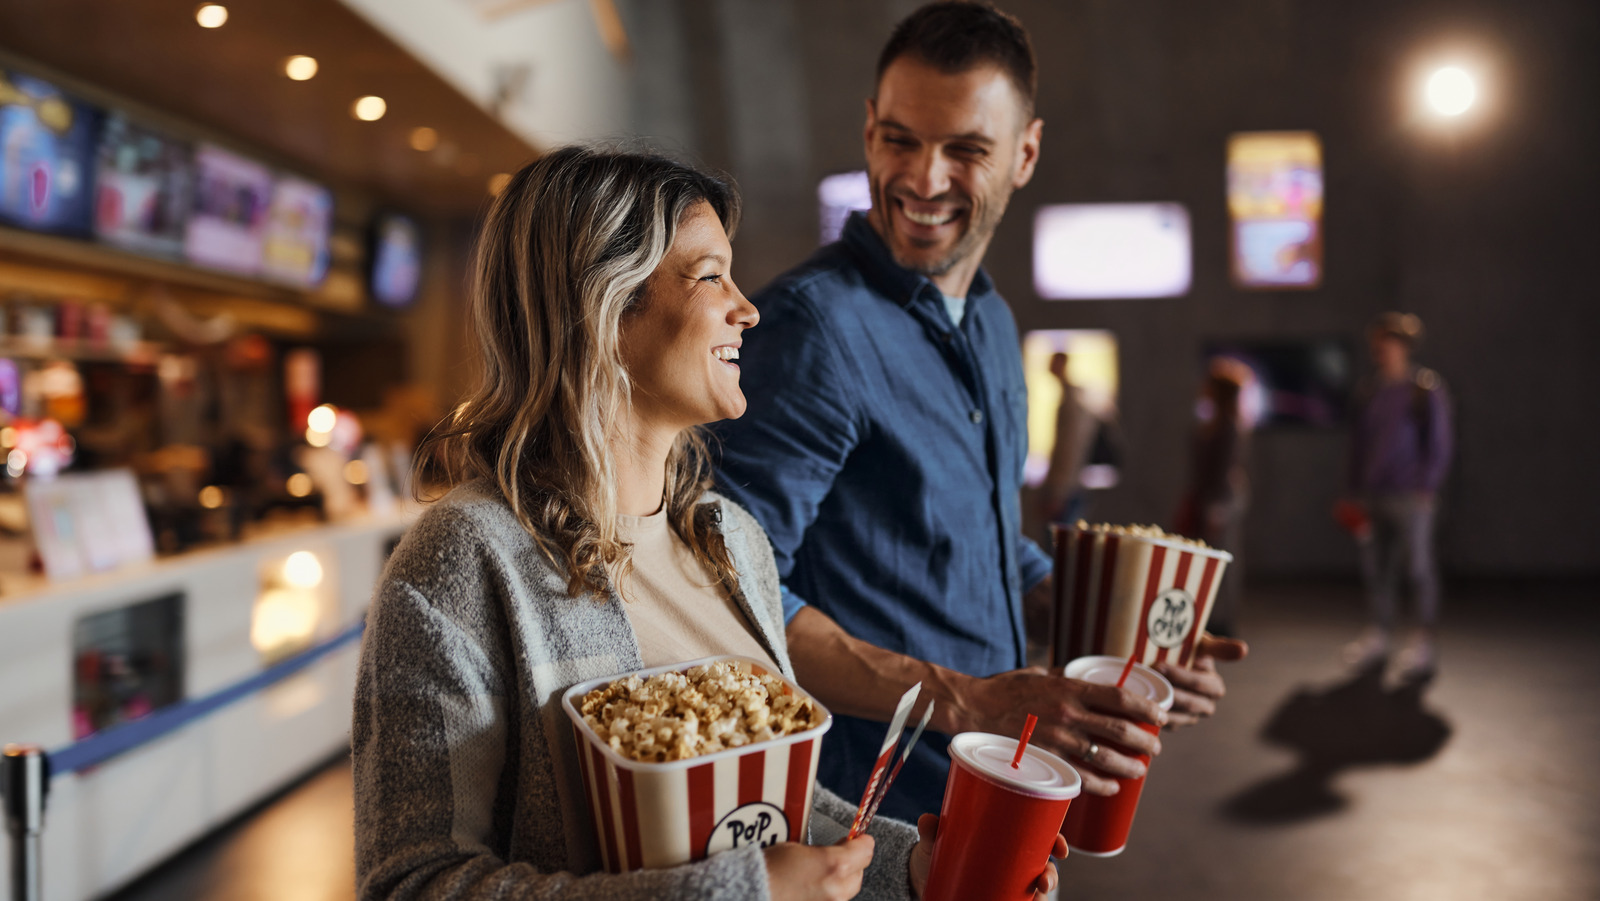 The Scientific Reason Movie Theater Food Cravings Are Hard To Control – Health Digest